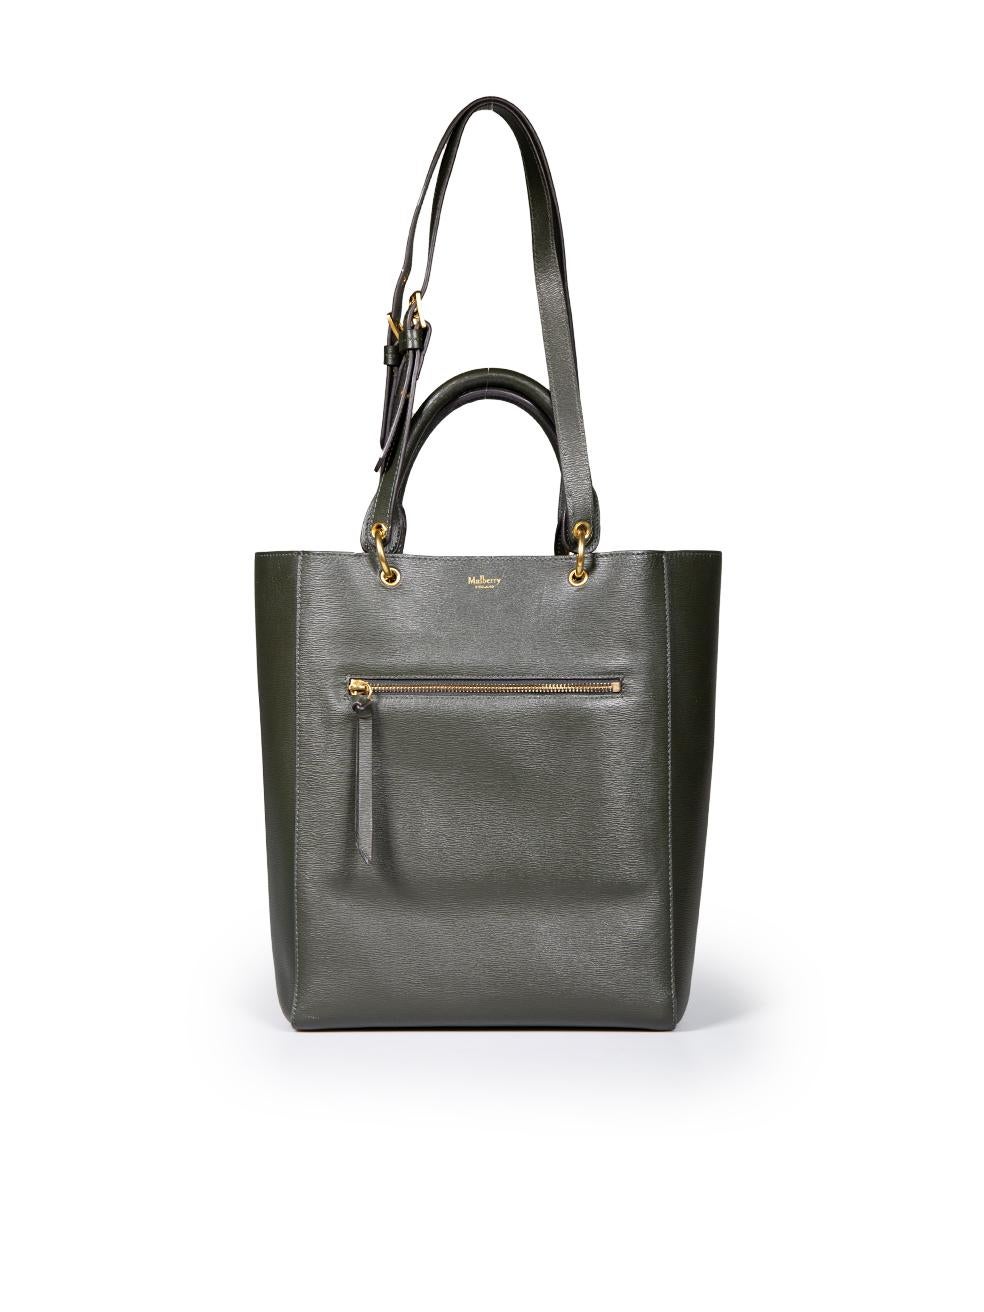 Mulberry Green Leather Maple Tote Bag In Good Condition For Sale In London, GB